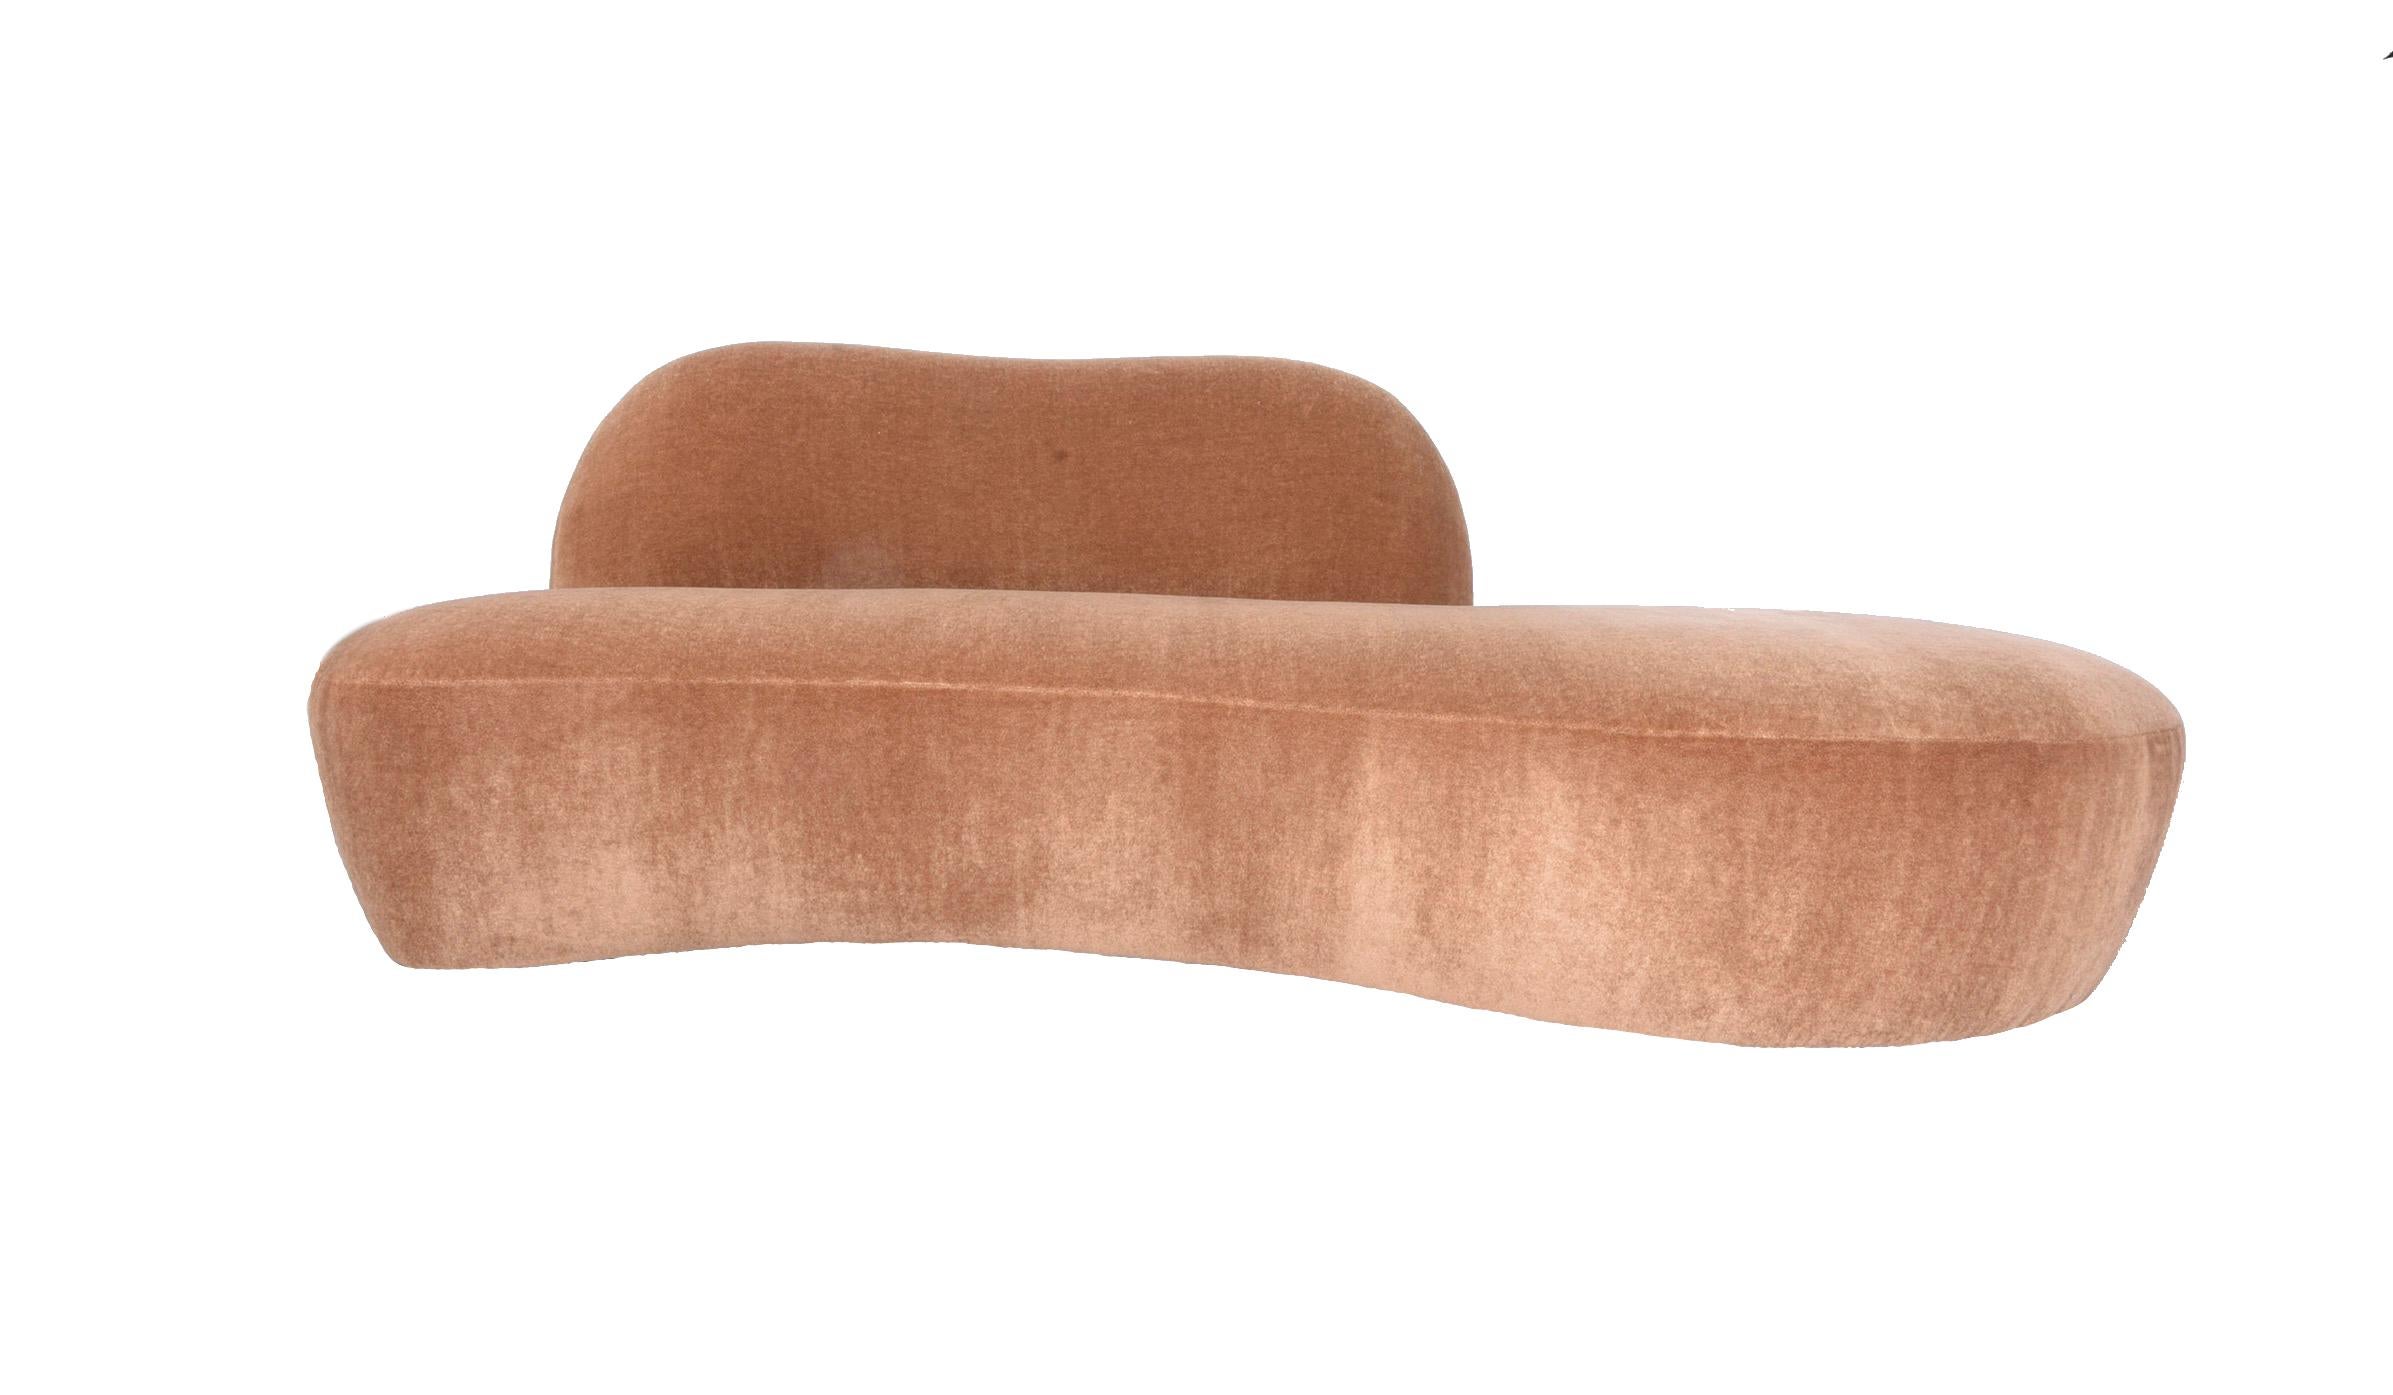 “Zoe sofa” by Vladimir Kagan. Newly upholstered in plush mohair upholstery.